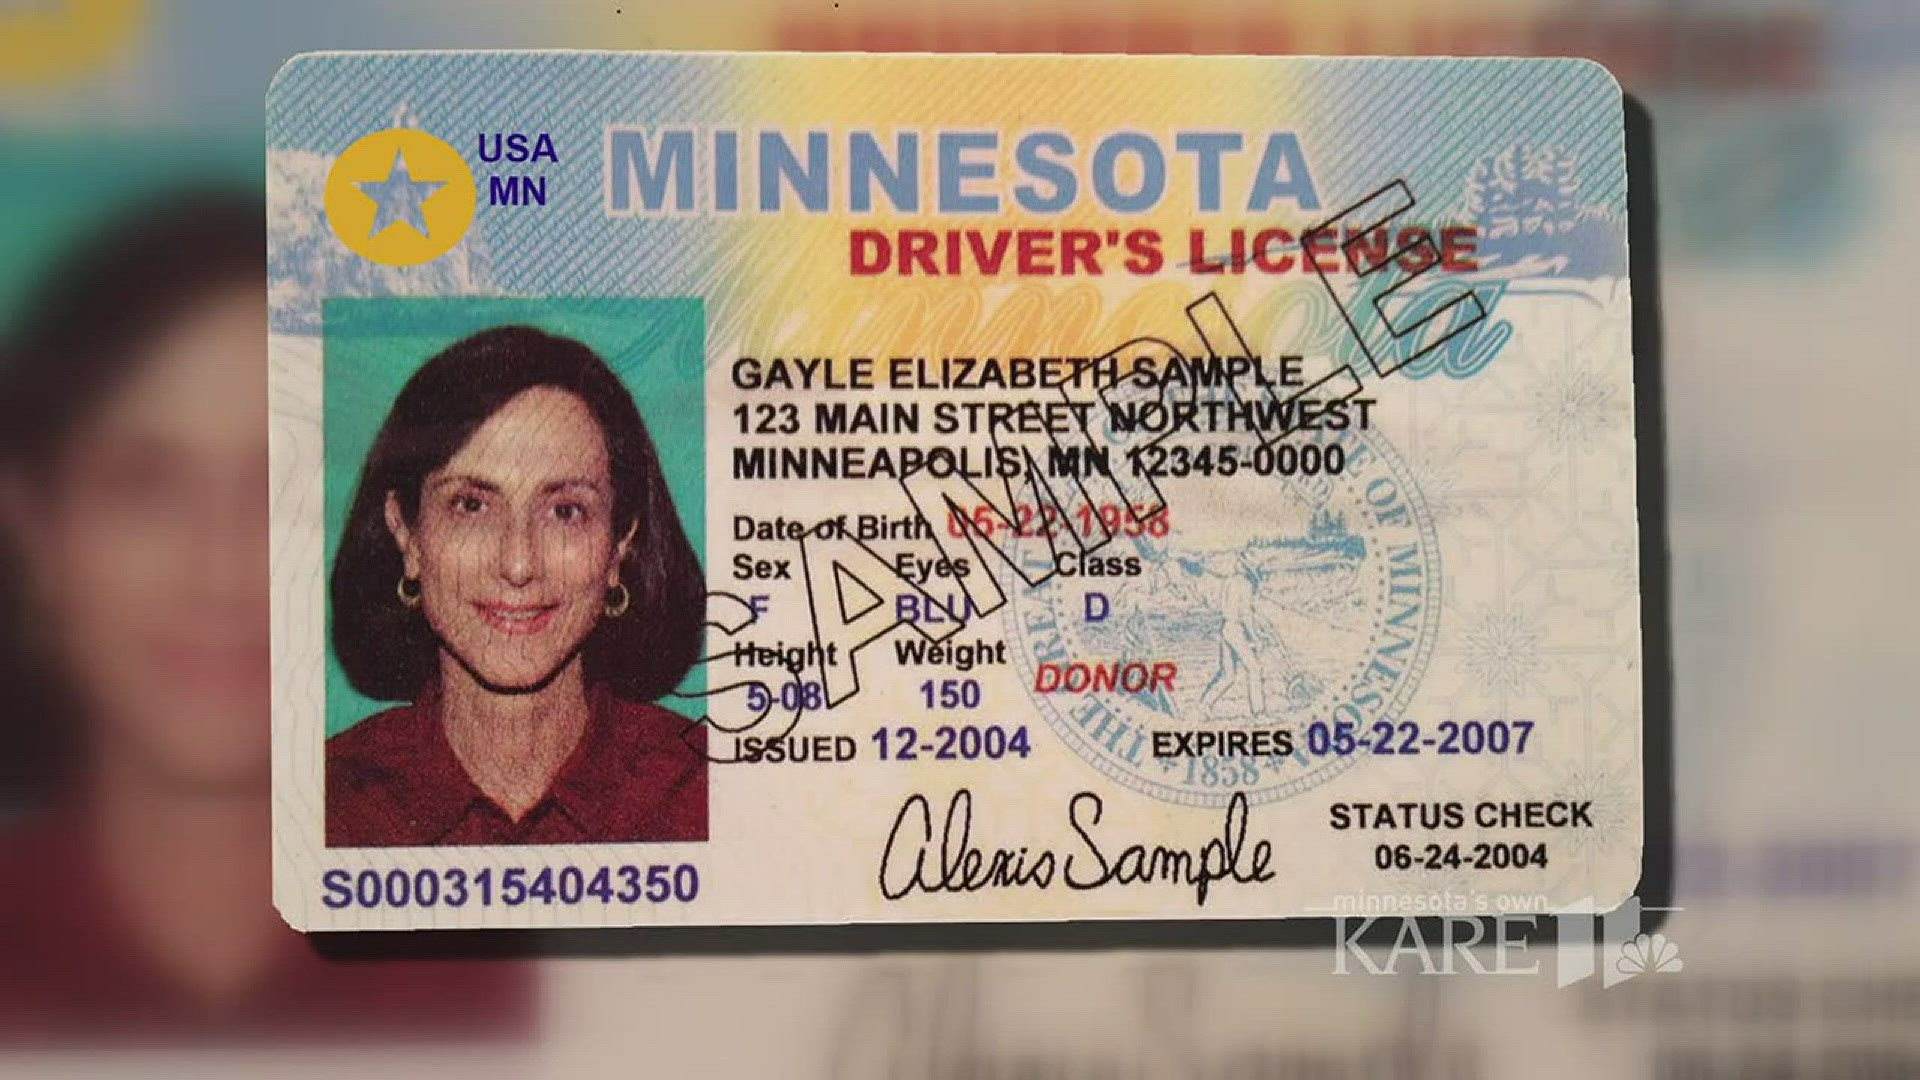 MN is approved for Real ID grace period